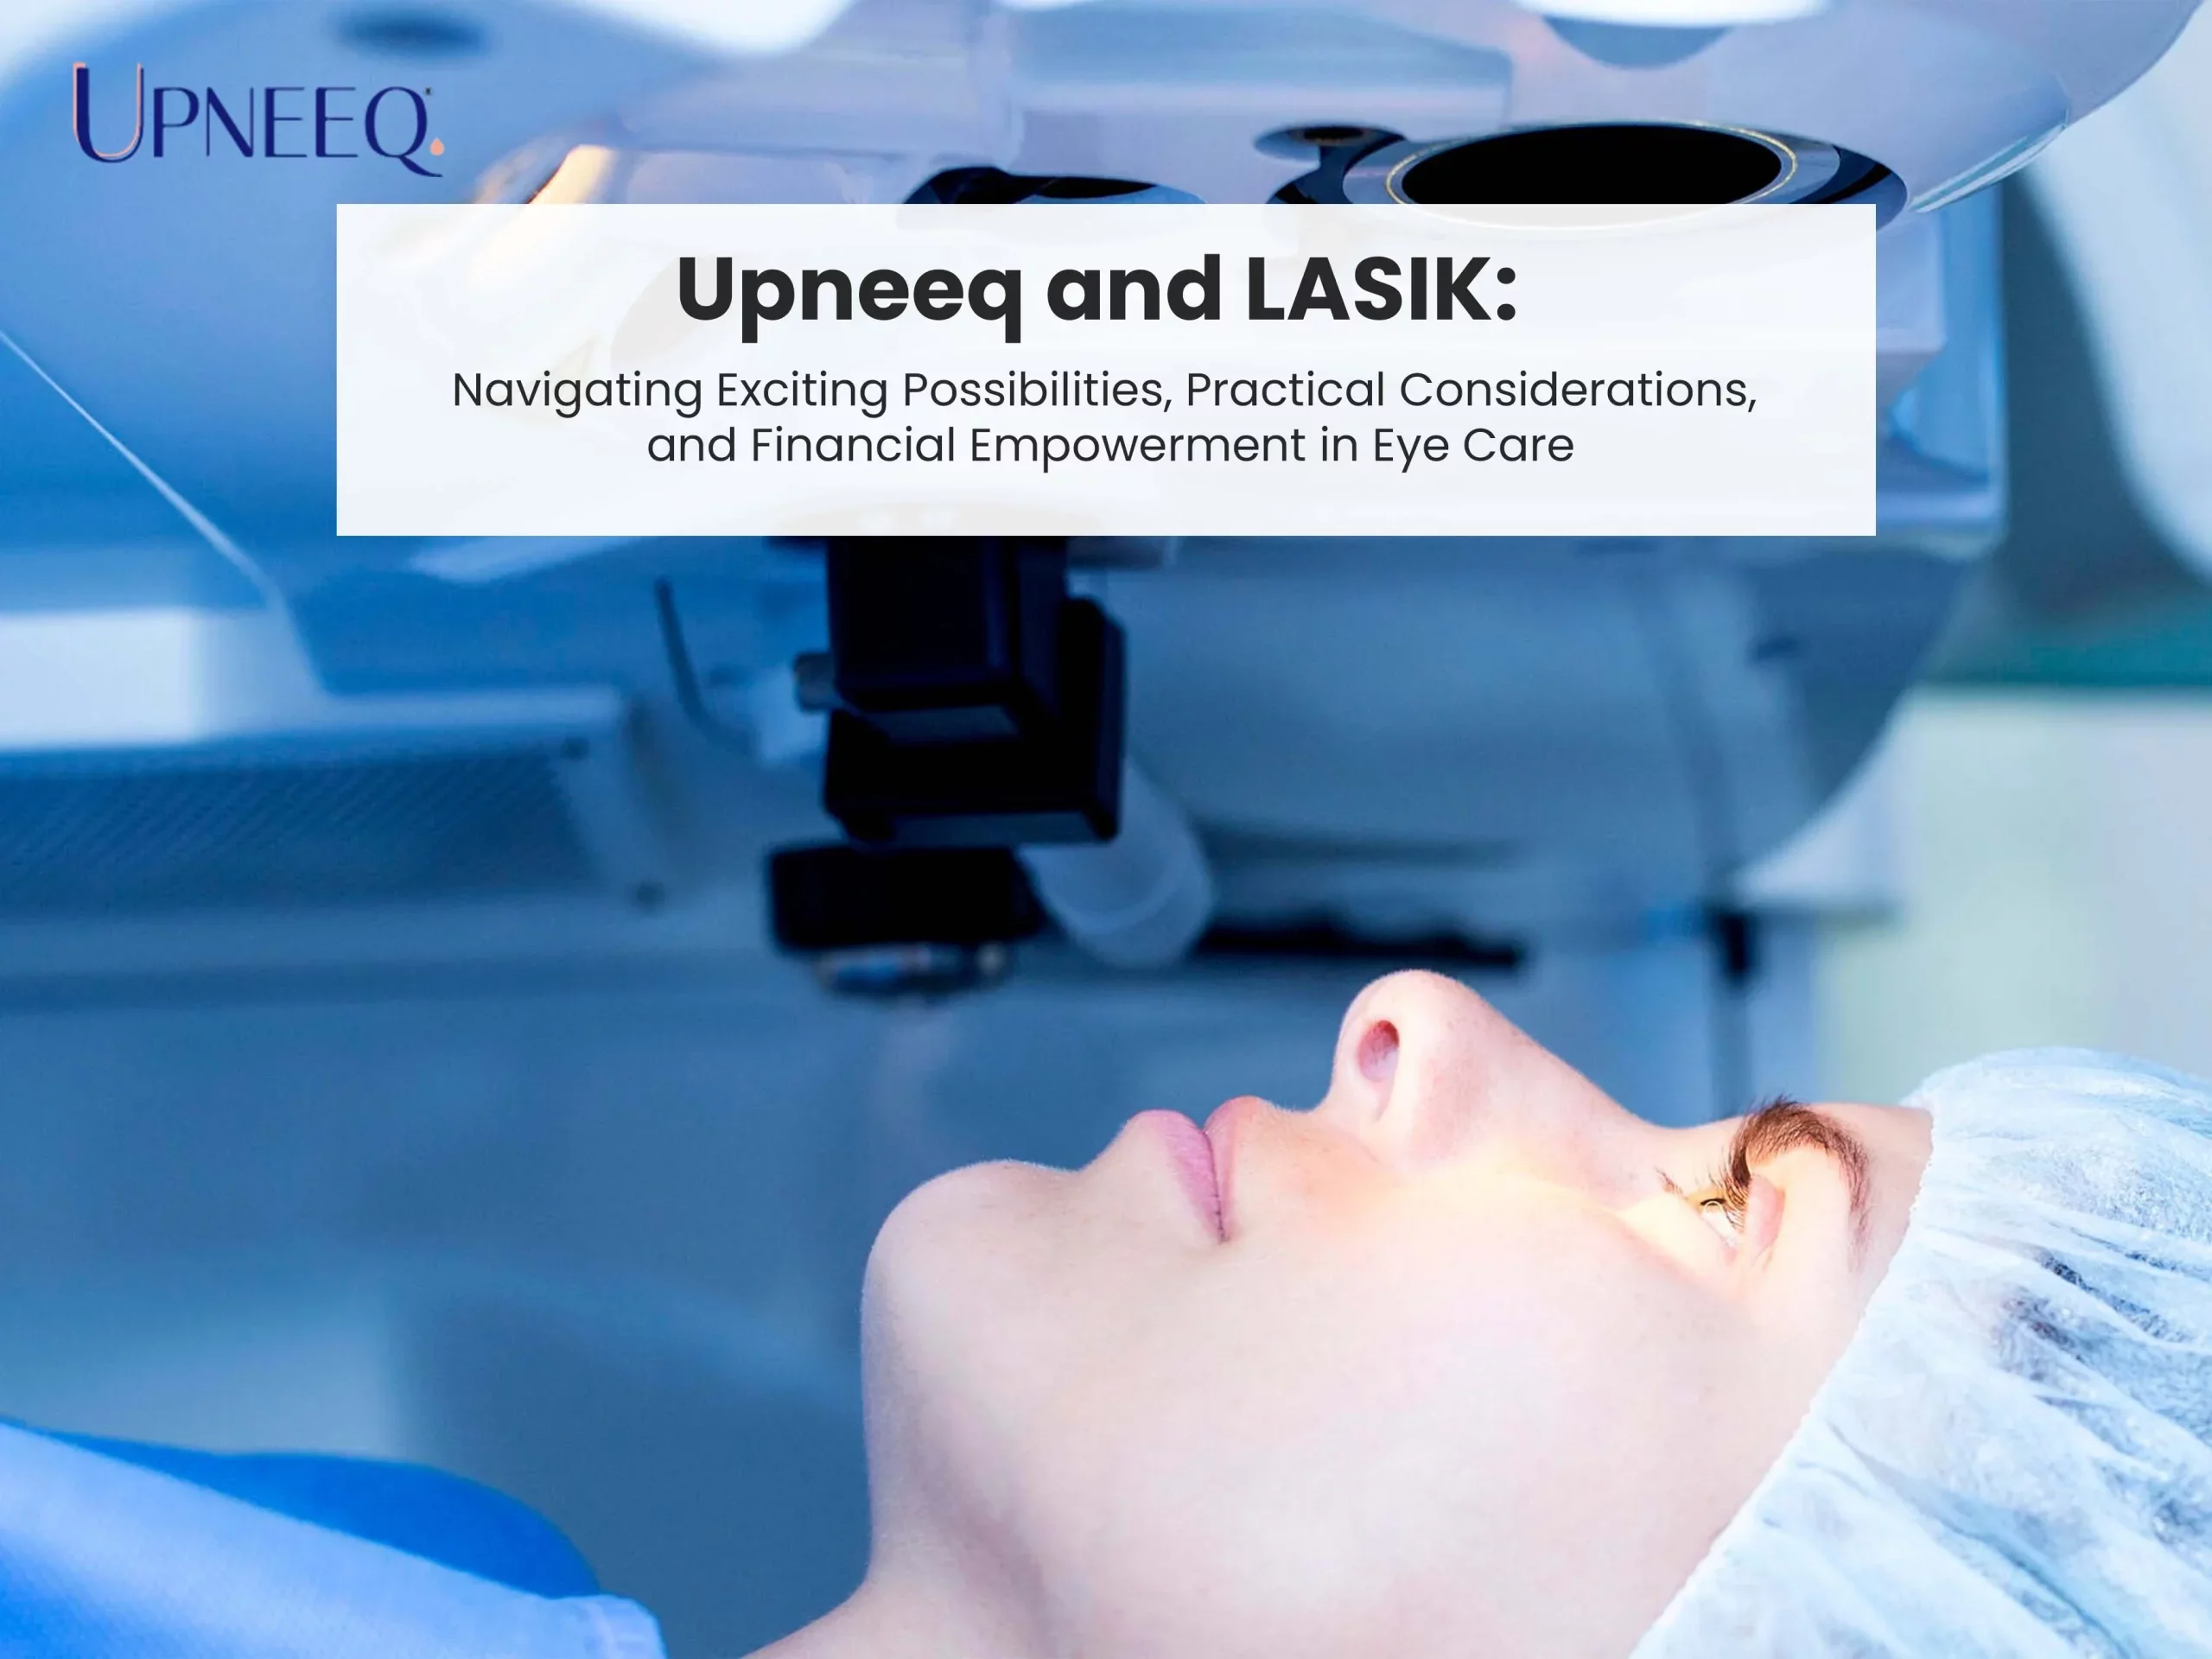 Upneeq and LASIK: Navigating Exciting Possibilities